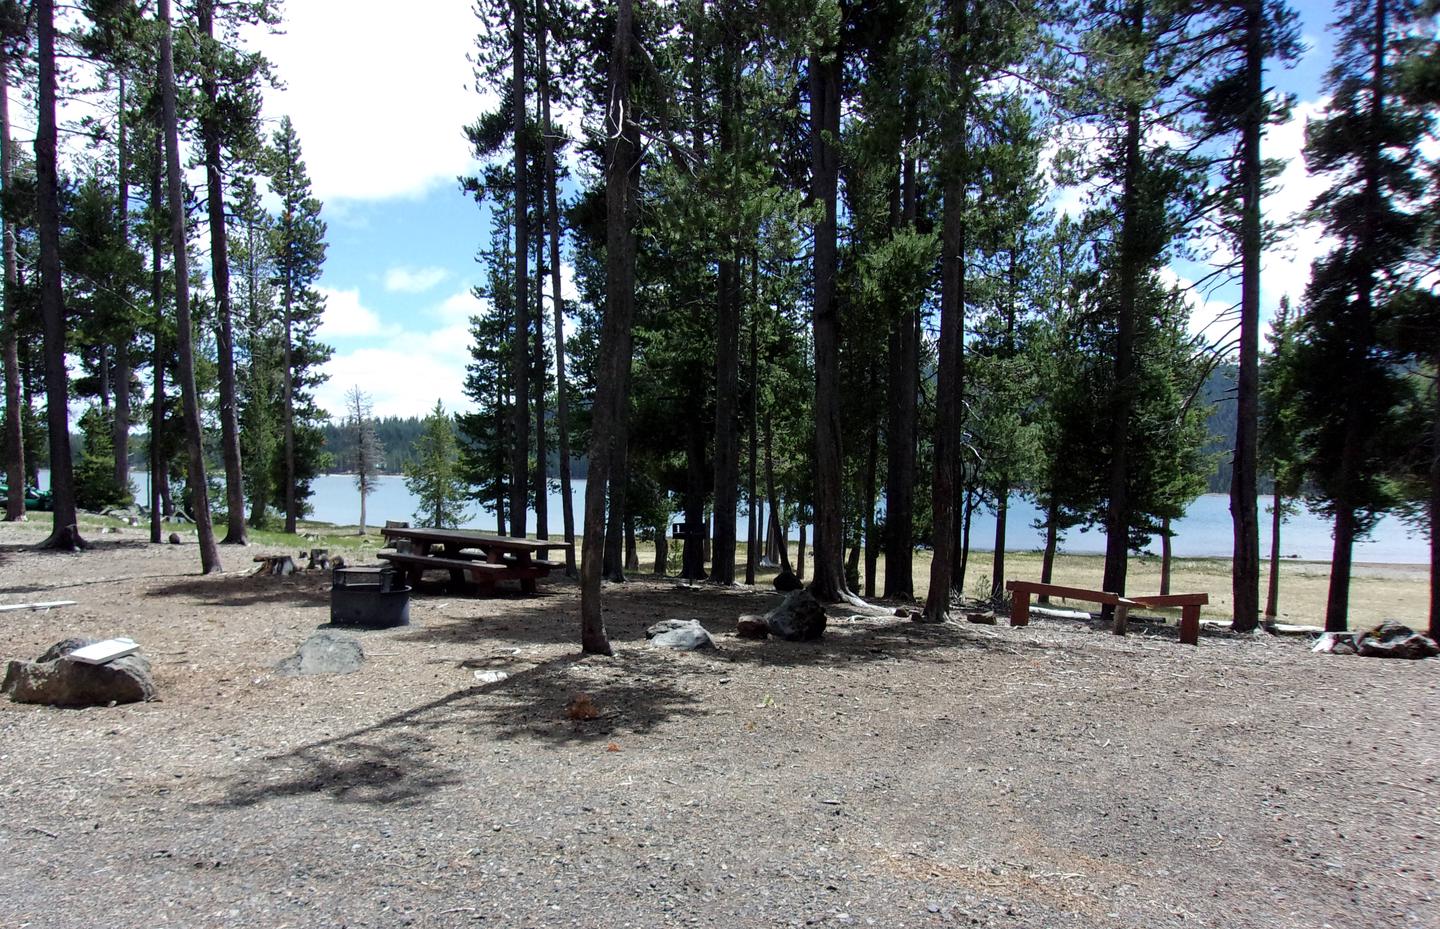 Lakefront with campfire ring, table and grillSite # 15 at Medicine Lake Campground